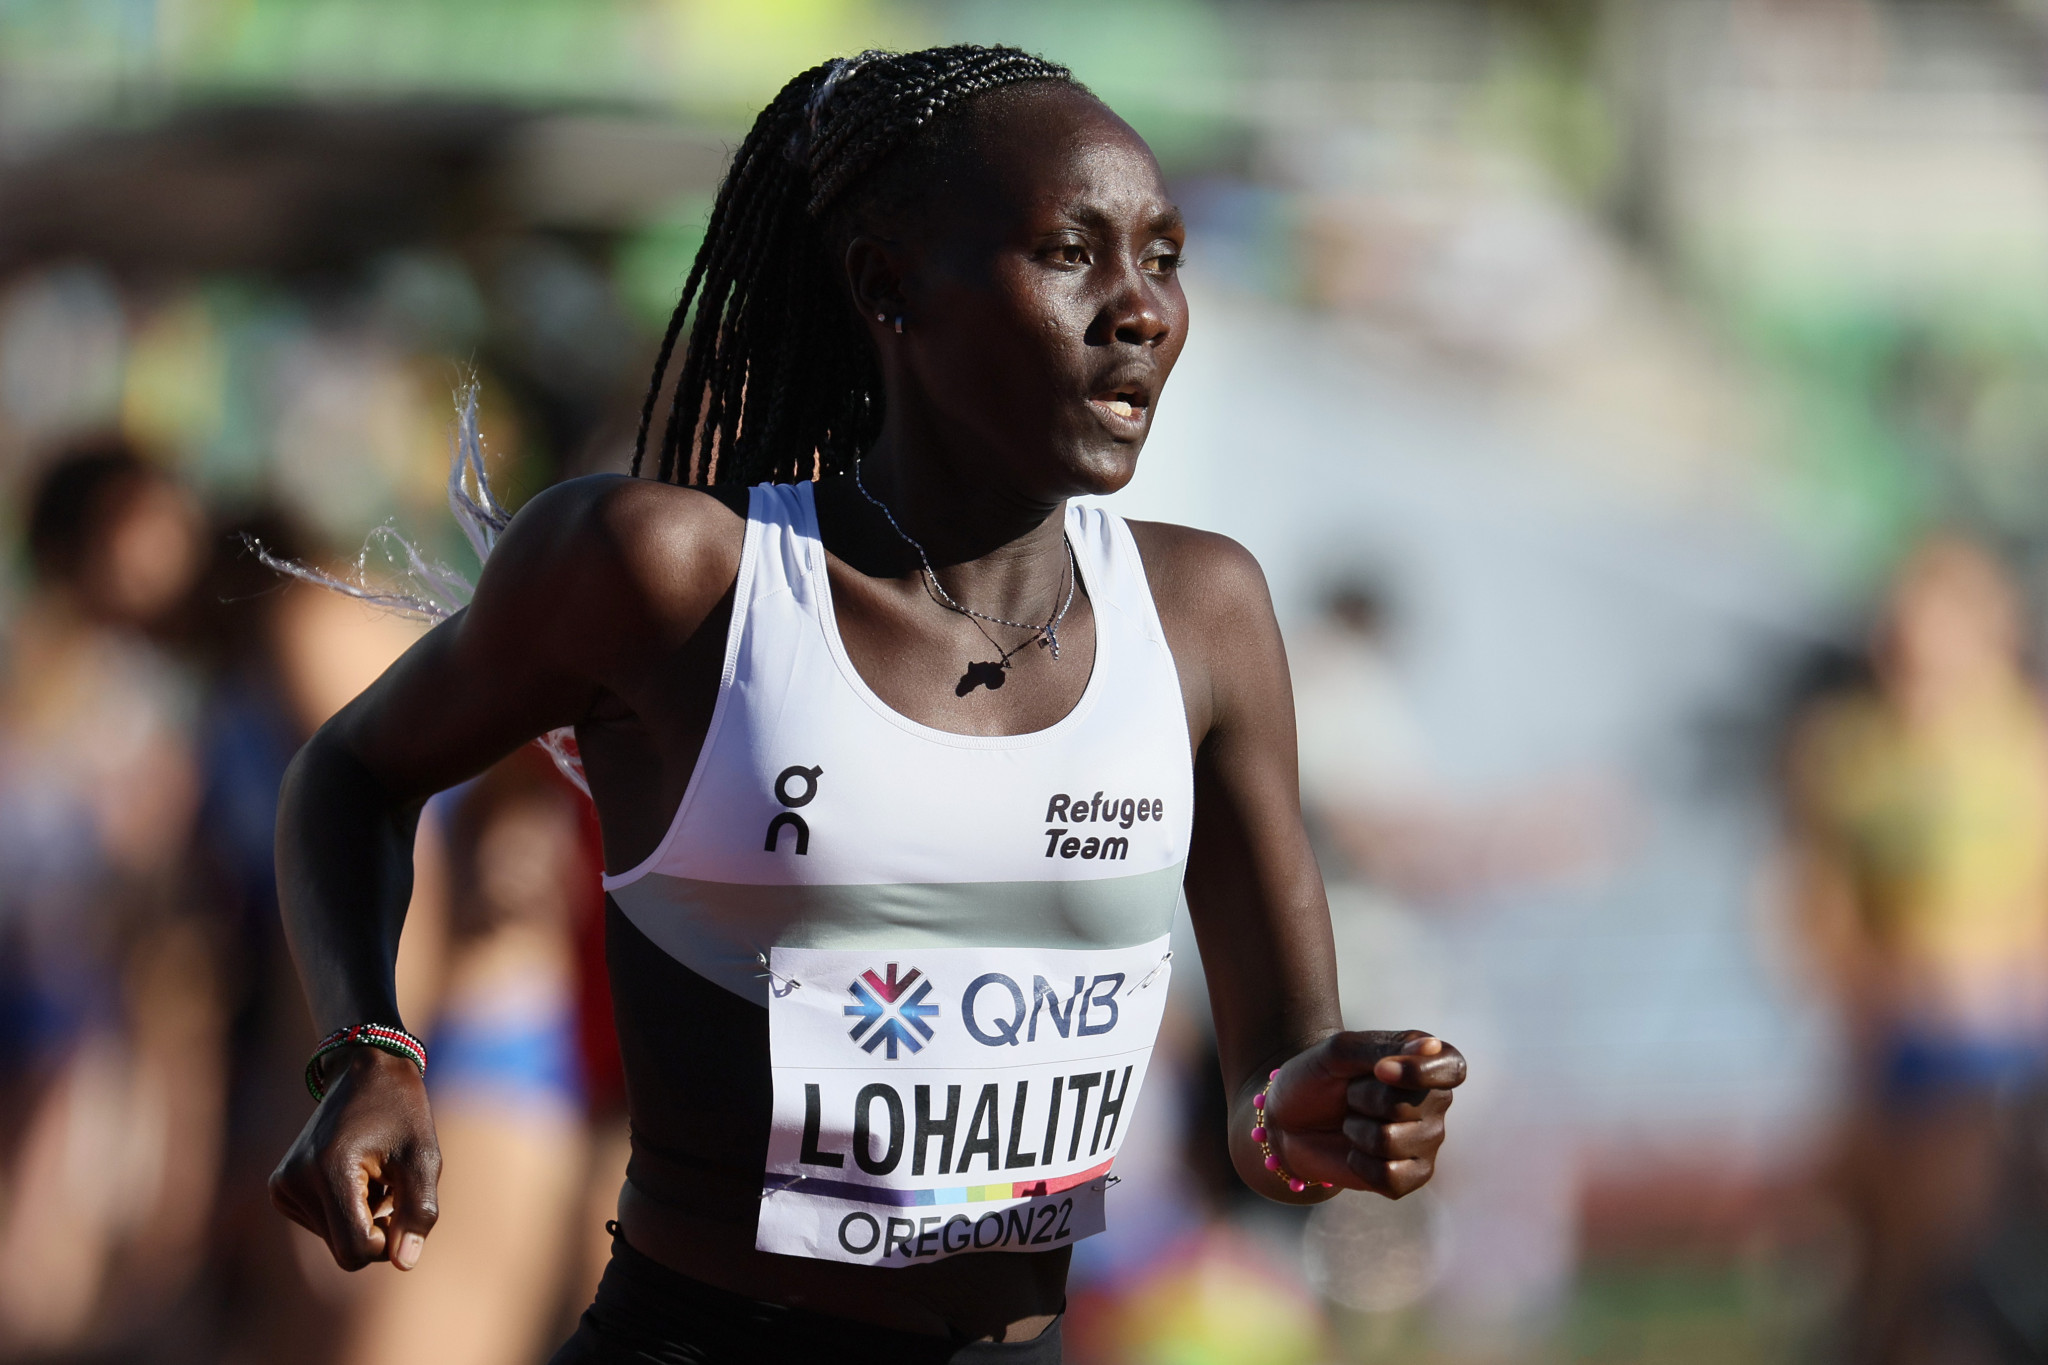 Anjelina Nadai Lohalith is to be part of the team in Kenya ©Getty Images